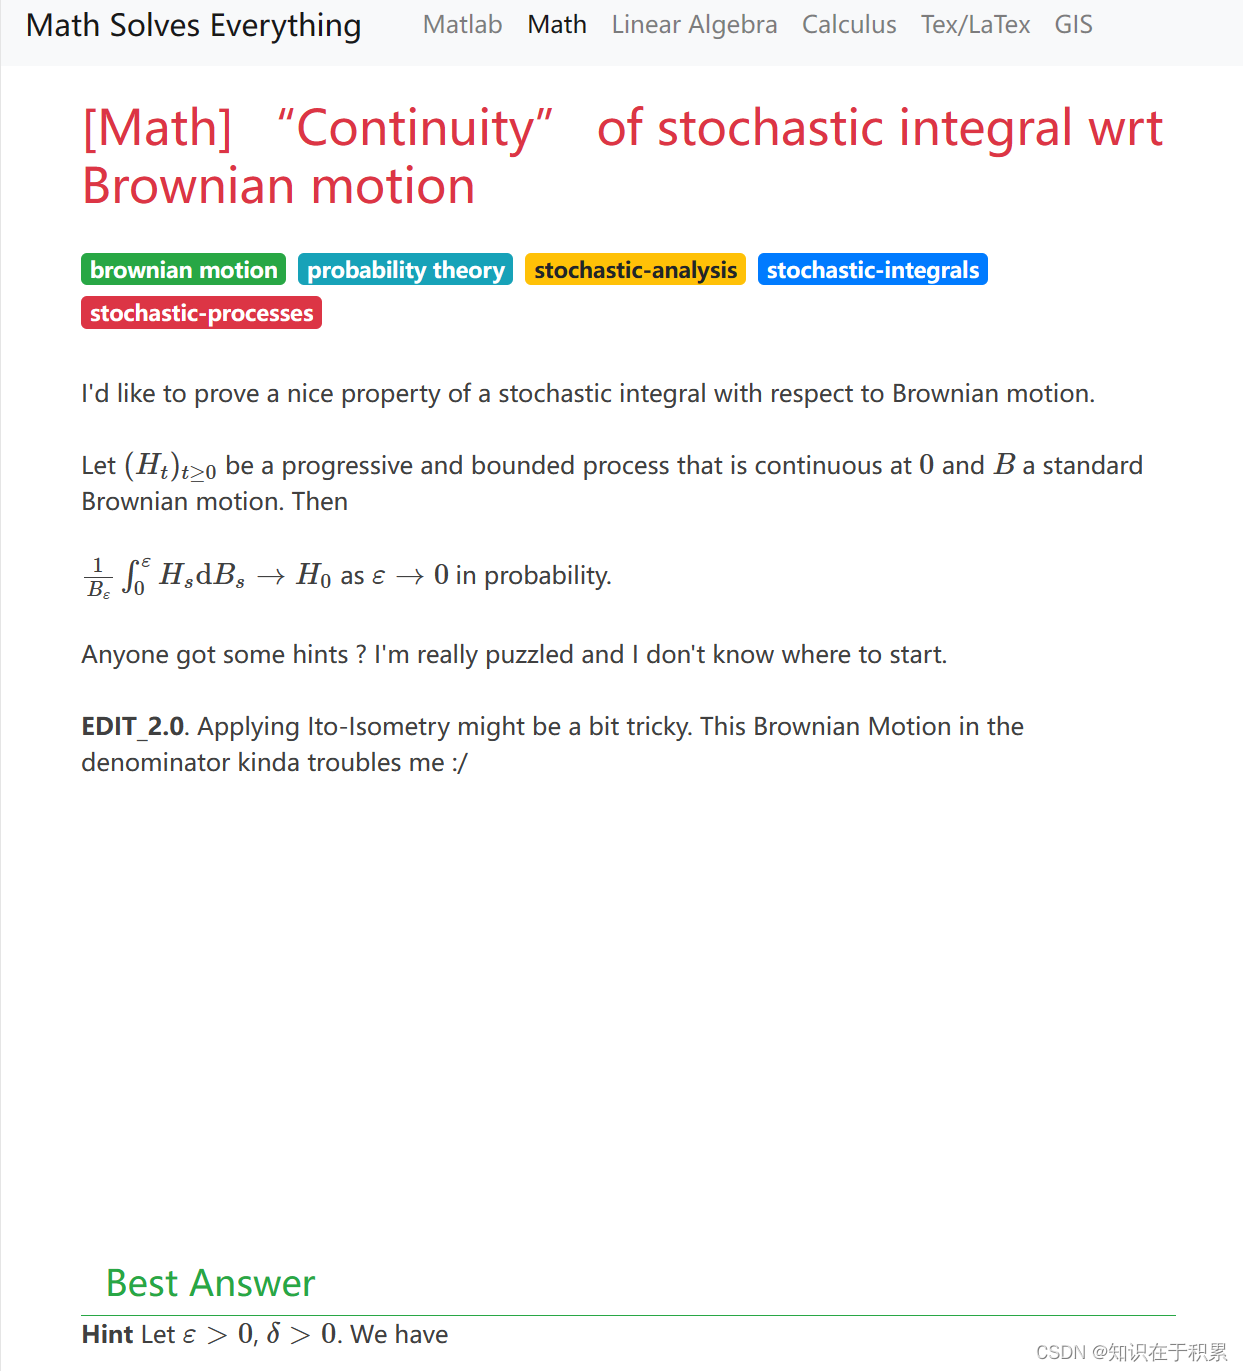 Continuity” of stochastic integral wrt Brownian motion